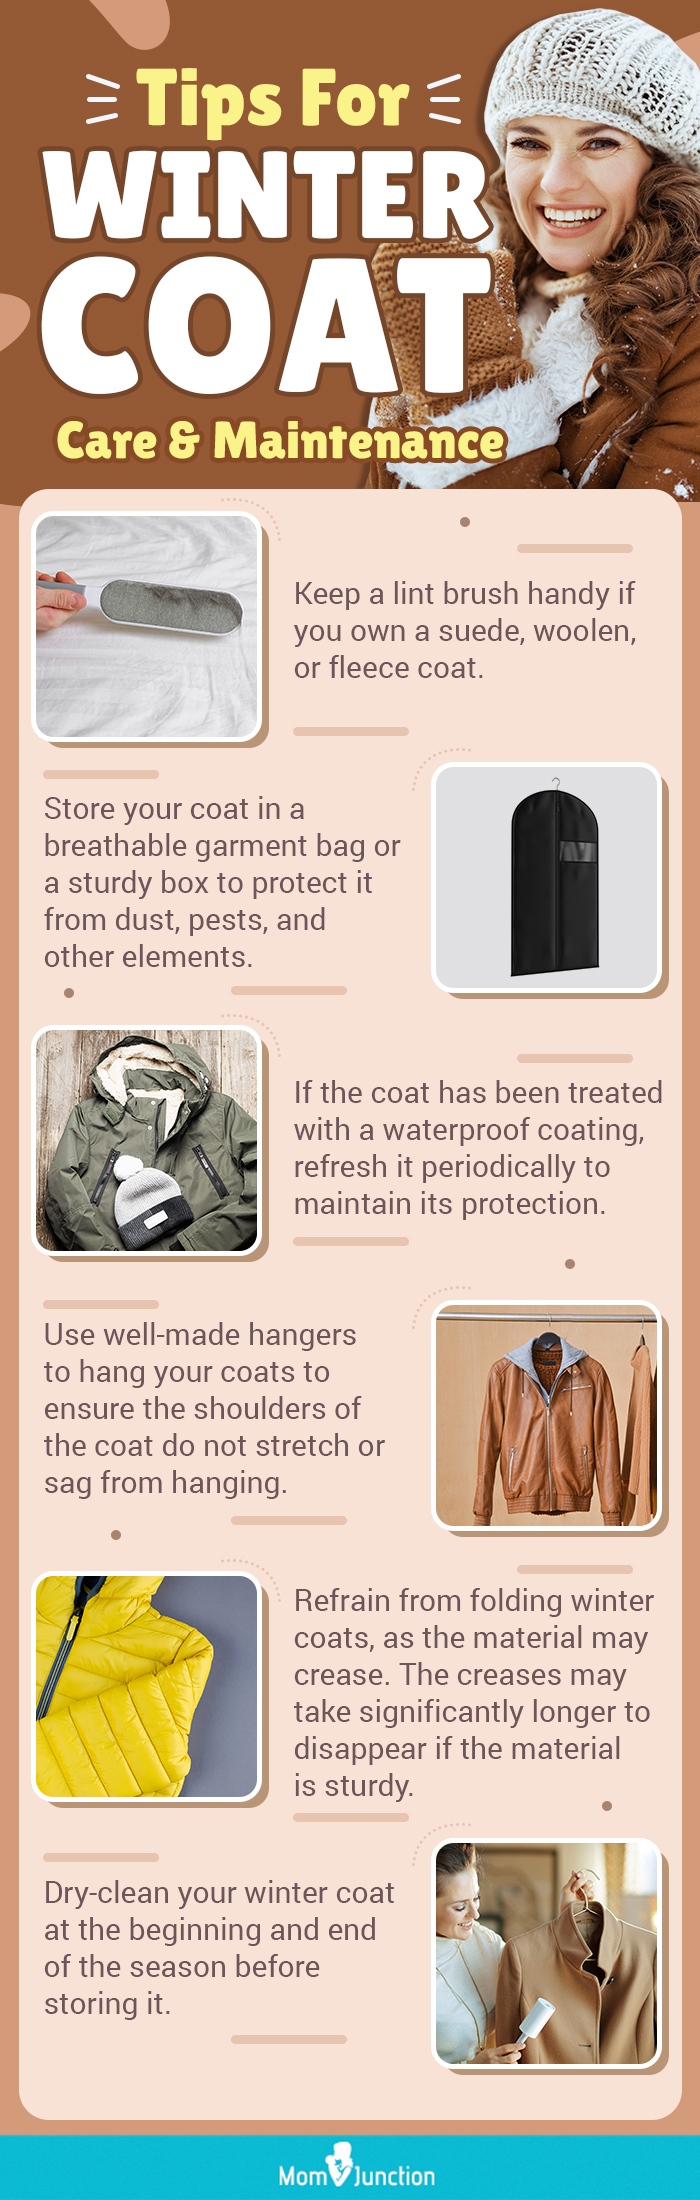 Tips For Winter Coat Care And Maintenance (infographic)